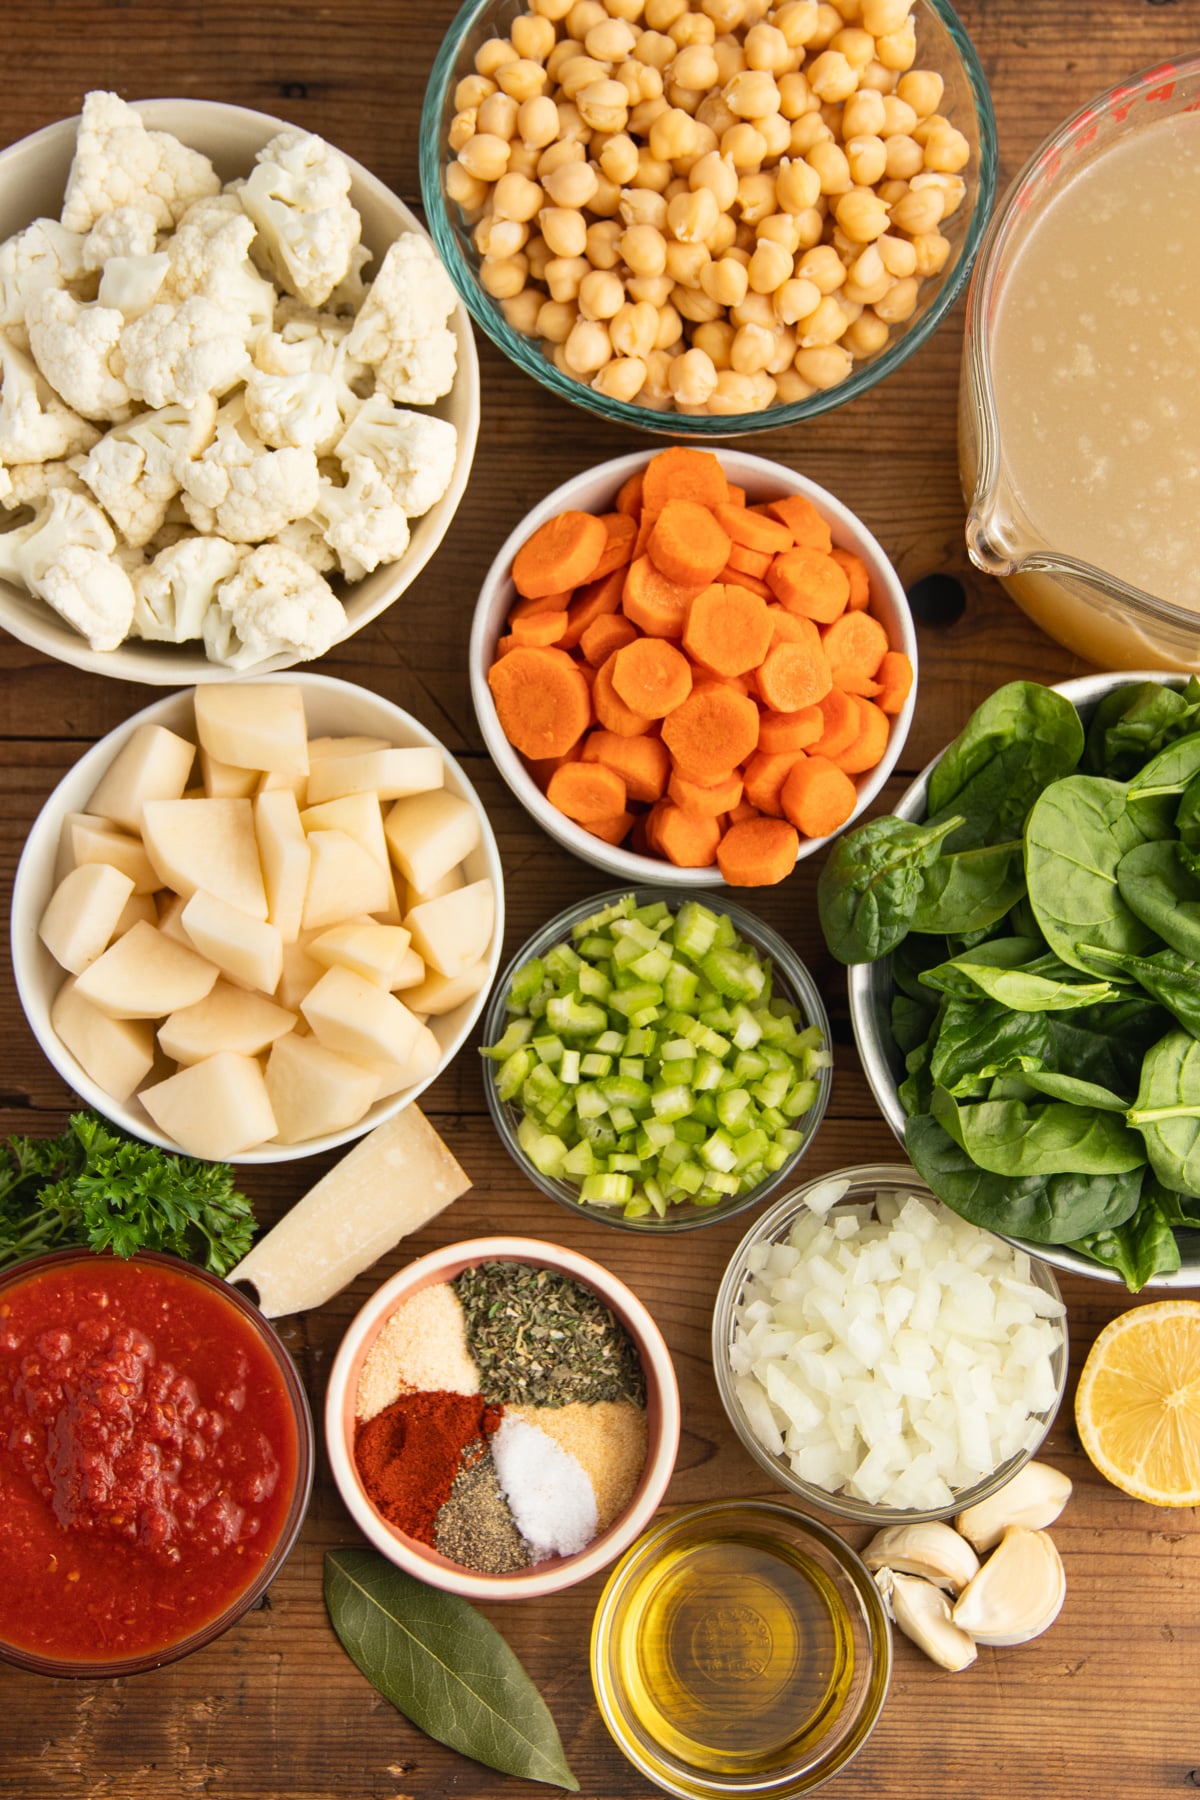 This is a picture of all the ingredients needed to make this soup.